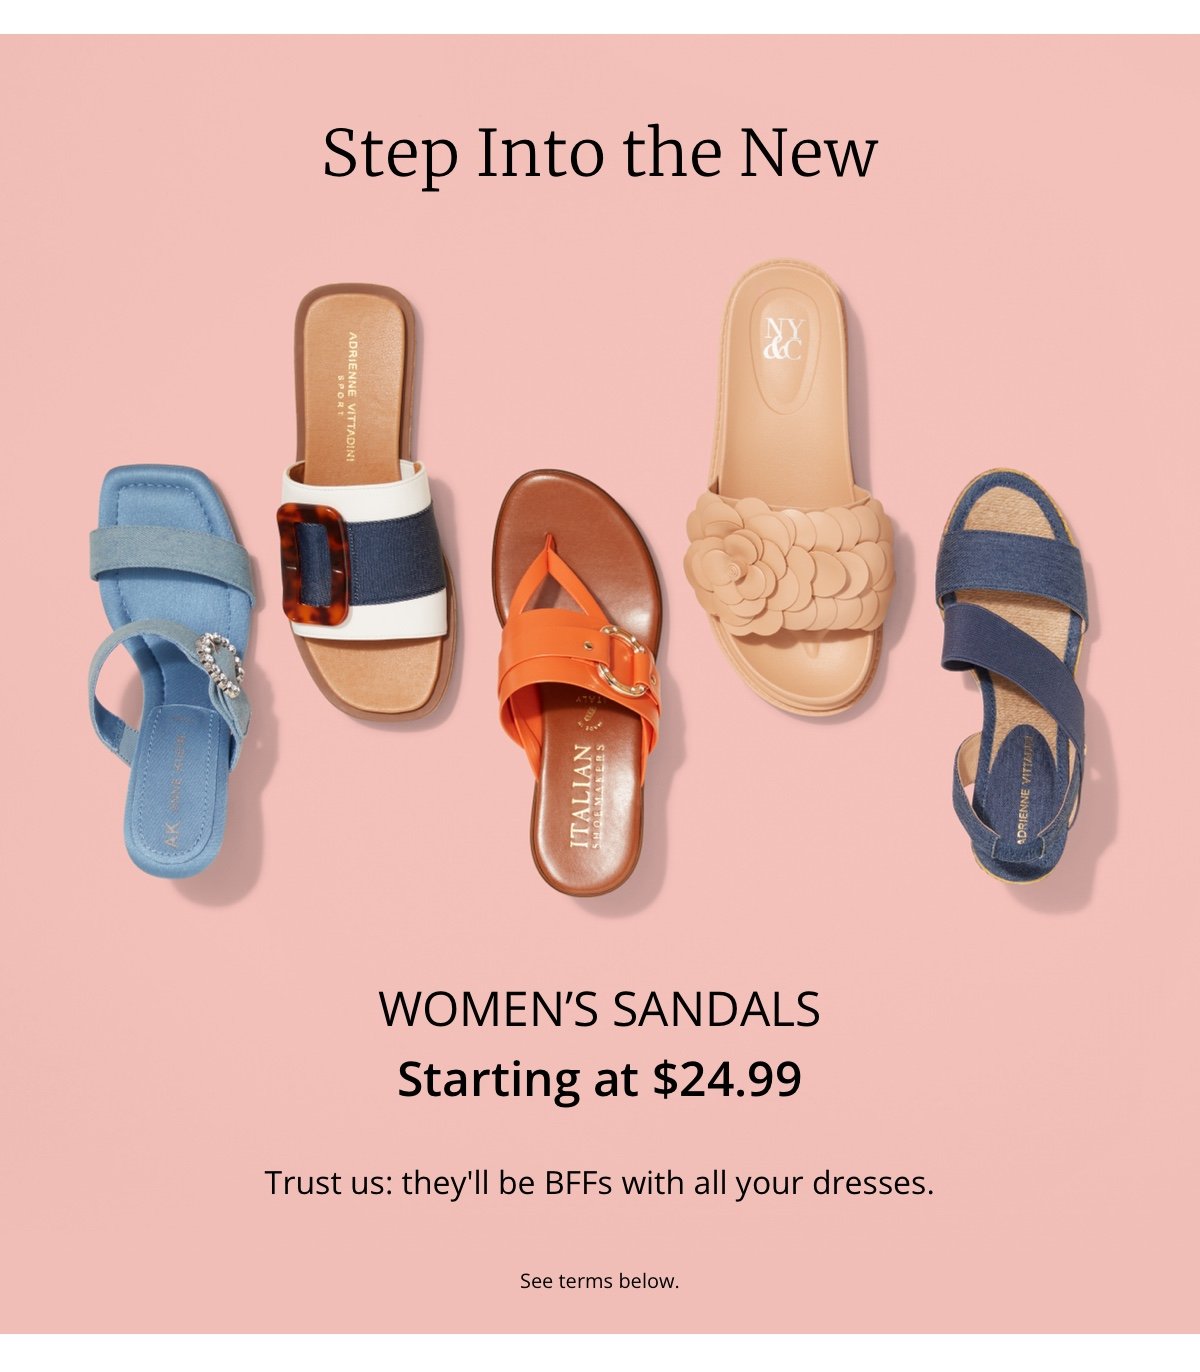 Step Into the New|Women’s Sandals|Starting at \\$24.99|Trust us: they ll be BFFs with all your dresses.|See Terms below.